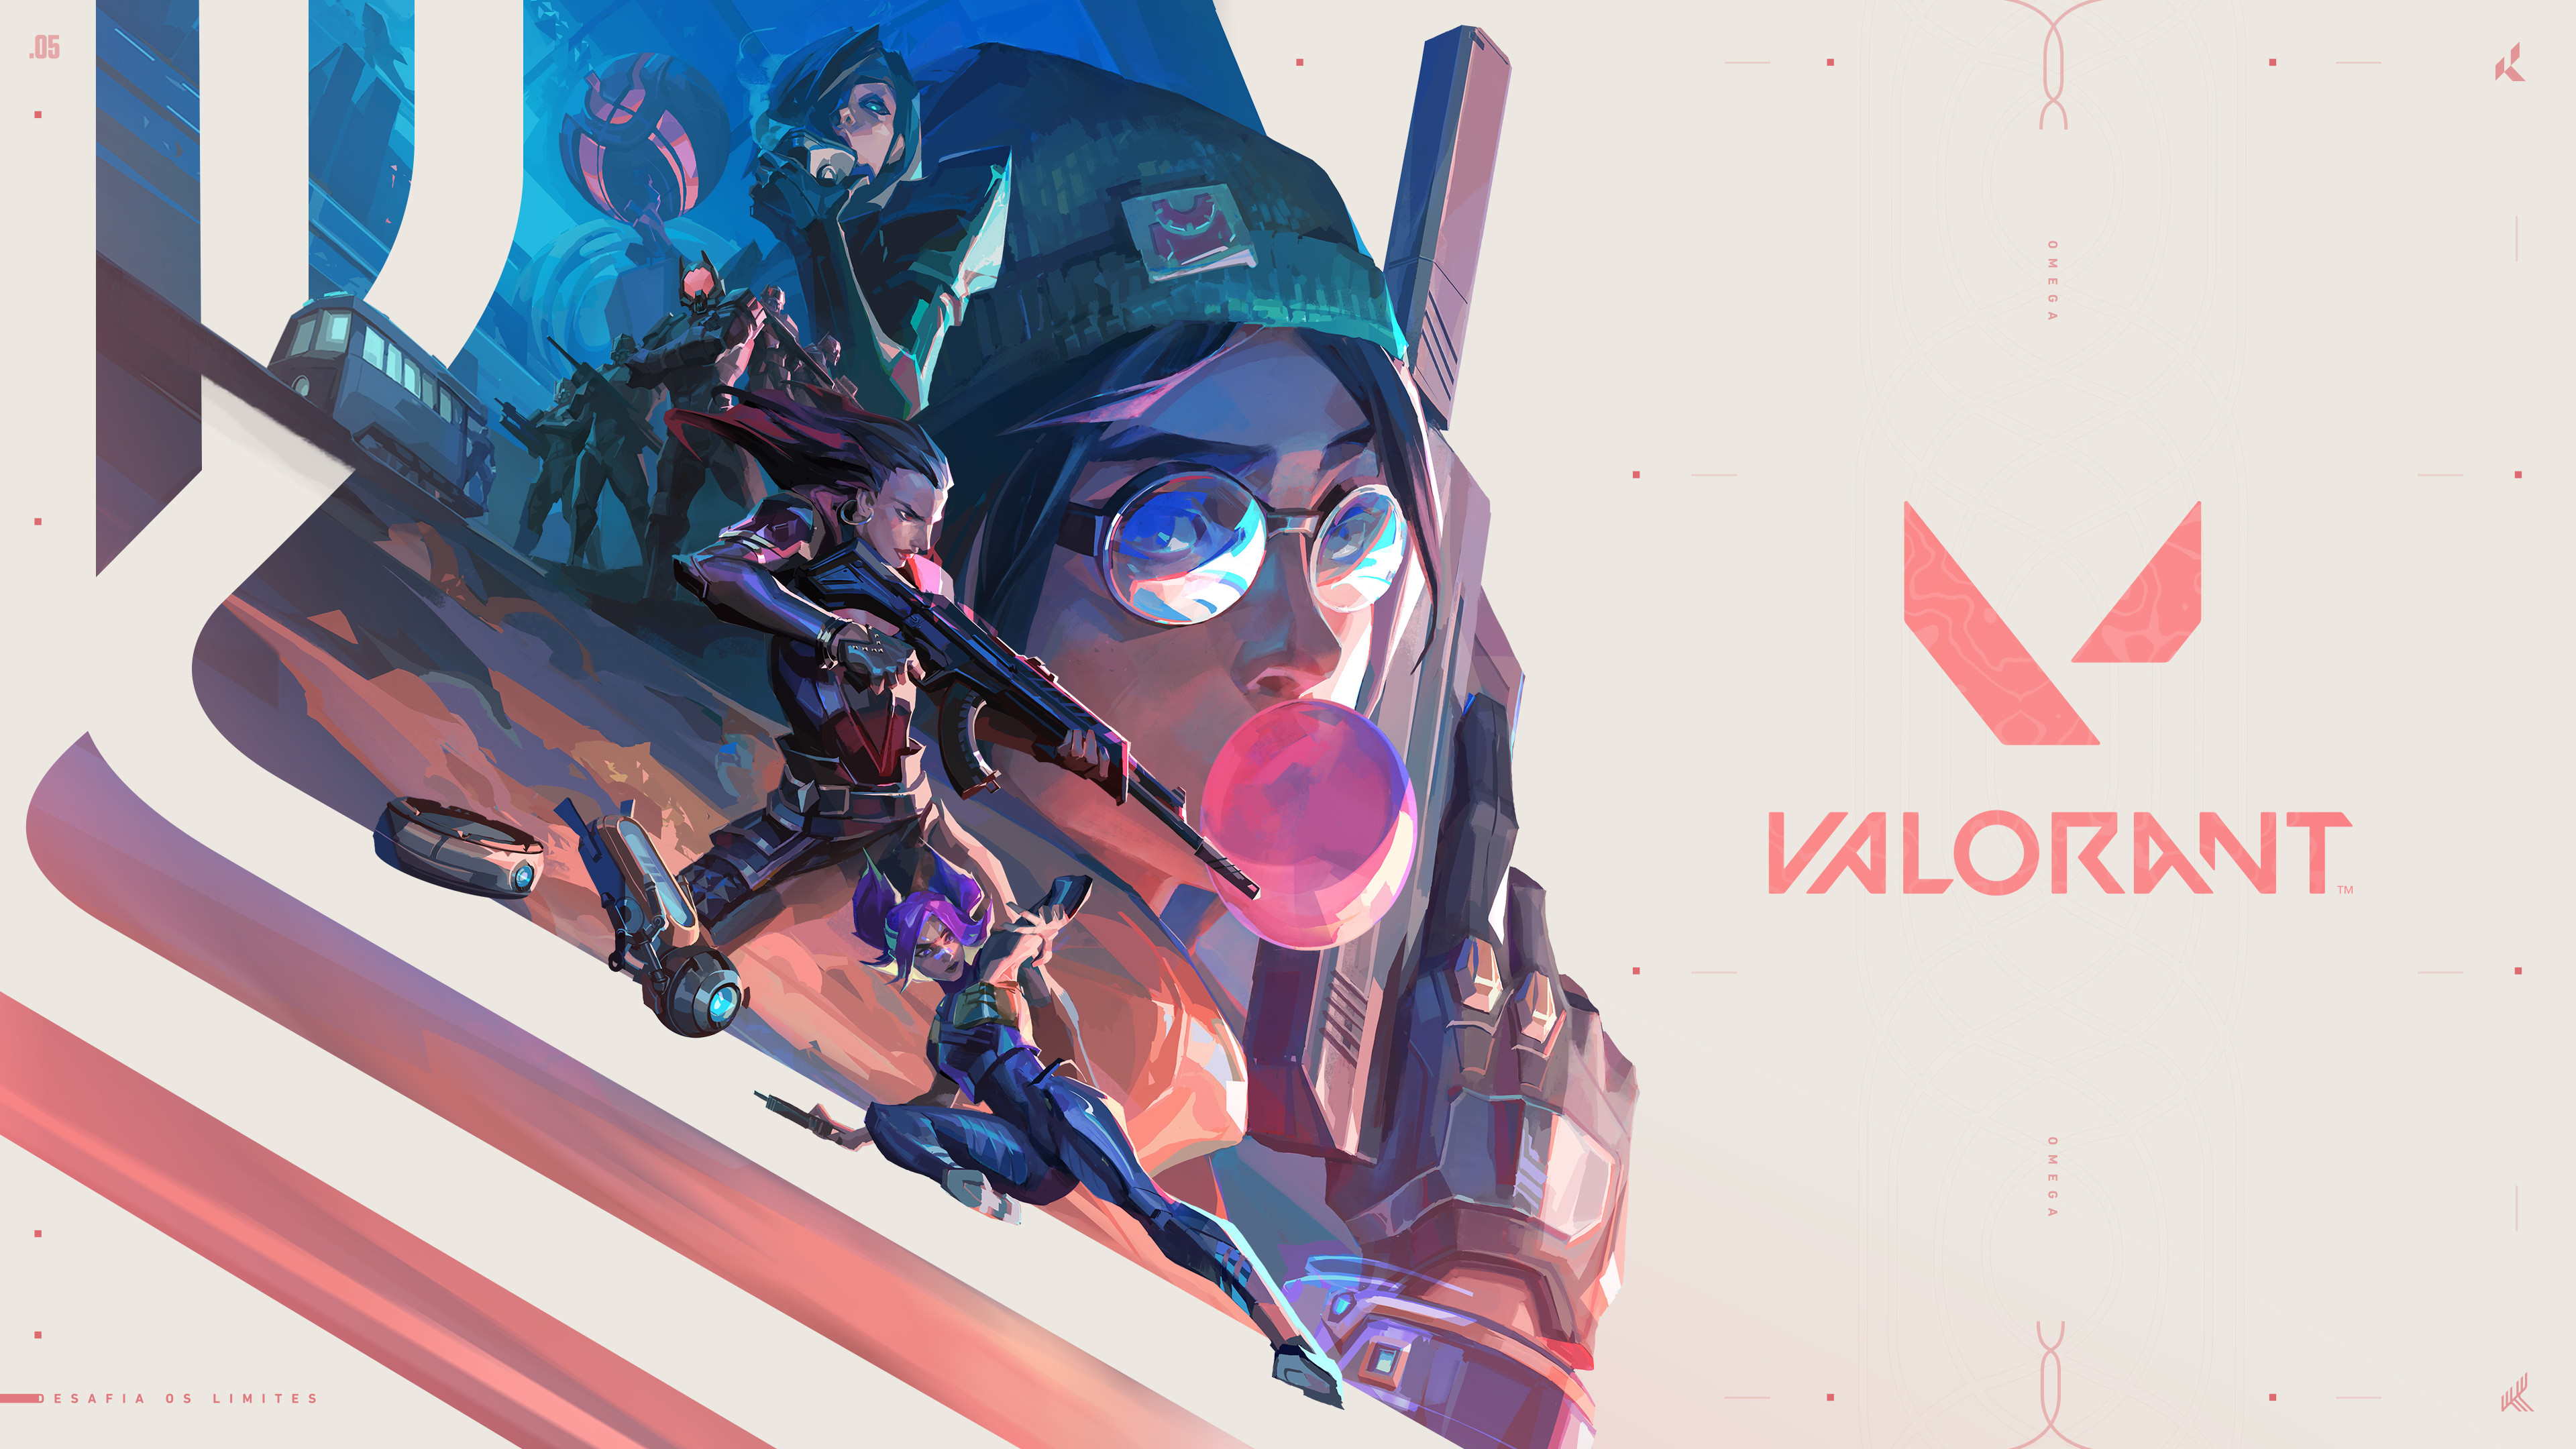 General 3840x2160 artwork video games PC gaming Valorant video game girls bubble gum weapon machine gun girls with guns women with glasses video game art